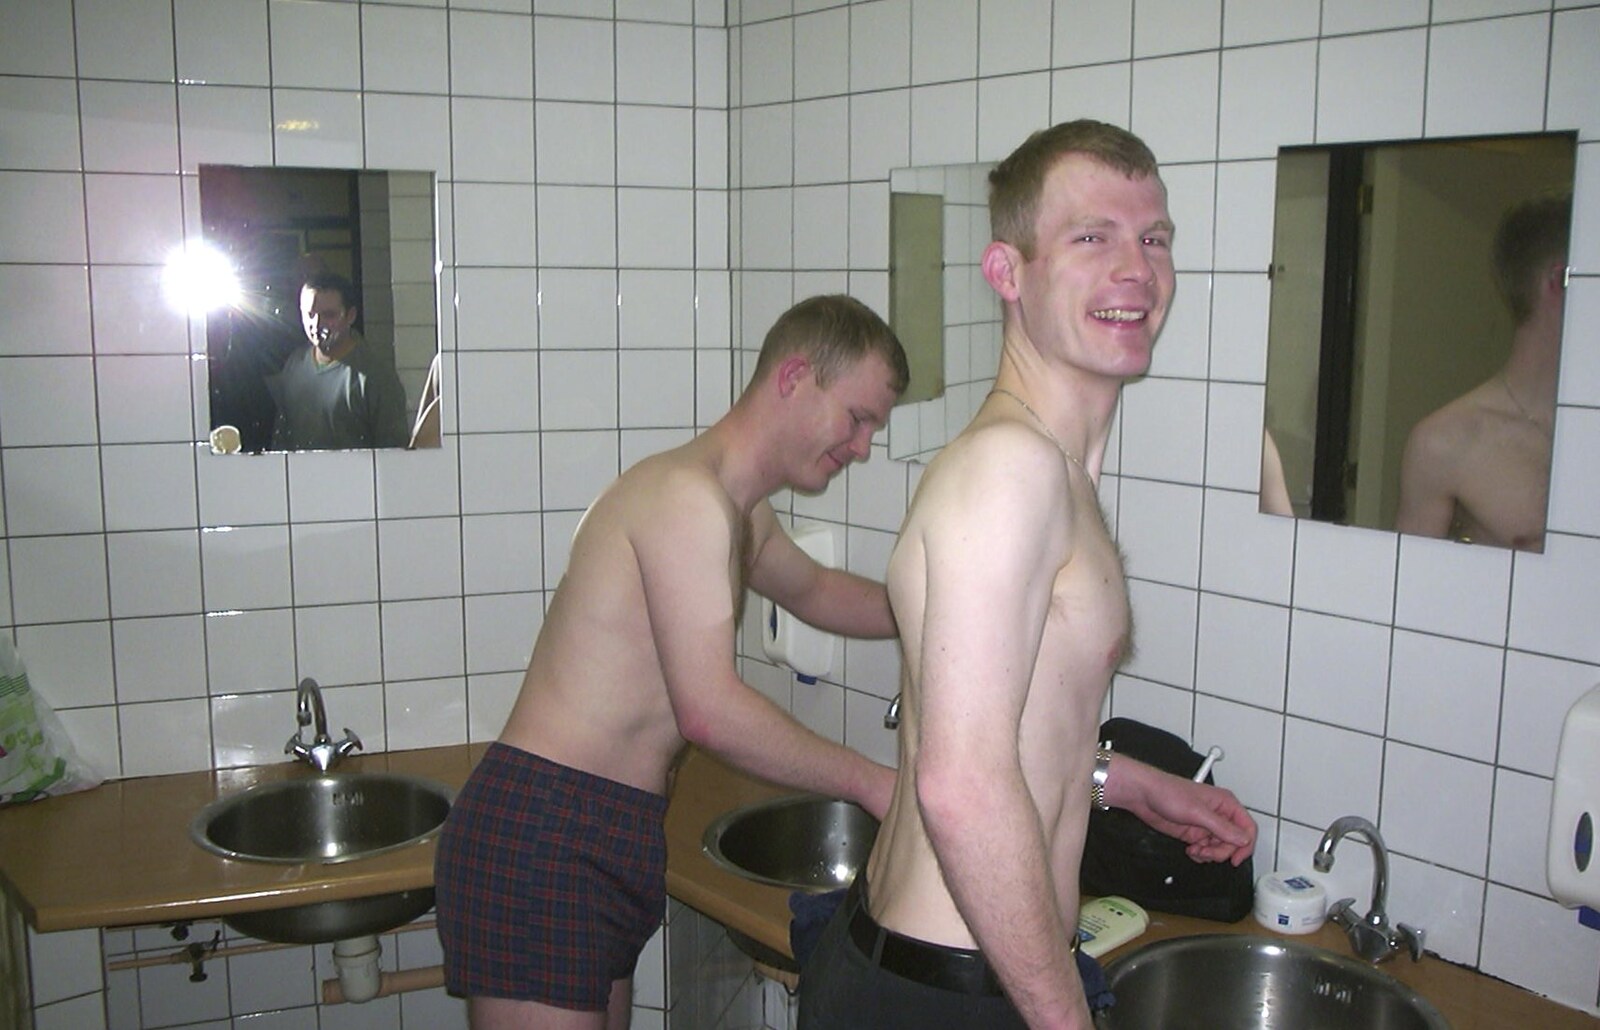 Mikey and Andy in the communual bathroom from Anne Frank, Markets and Mikey-P's Stag Do, Amsterdam, Netherlands - 6th March 2004